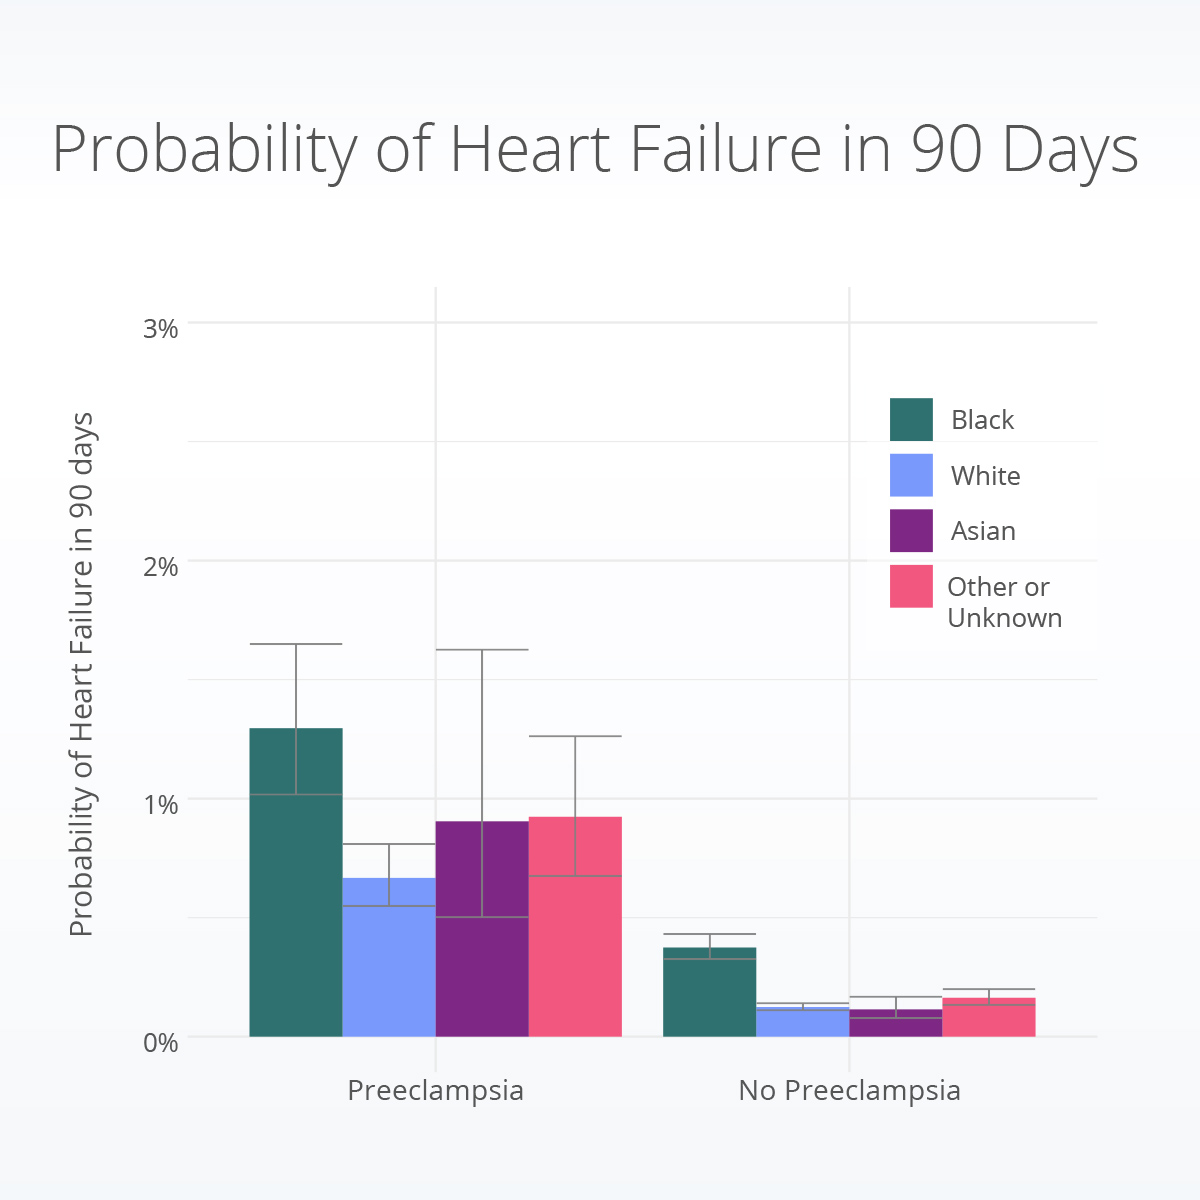 Probability of heart failure in 90 days following delivery by race